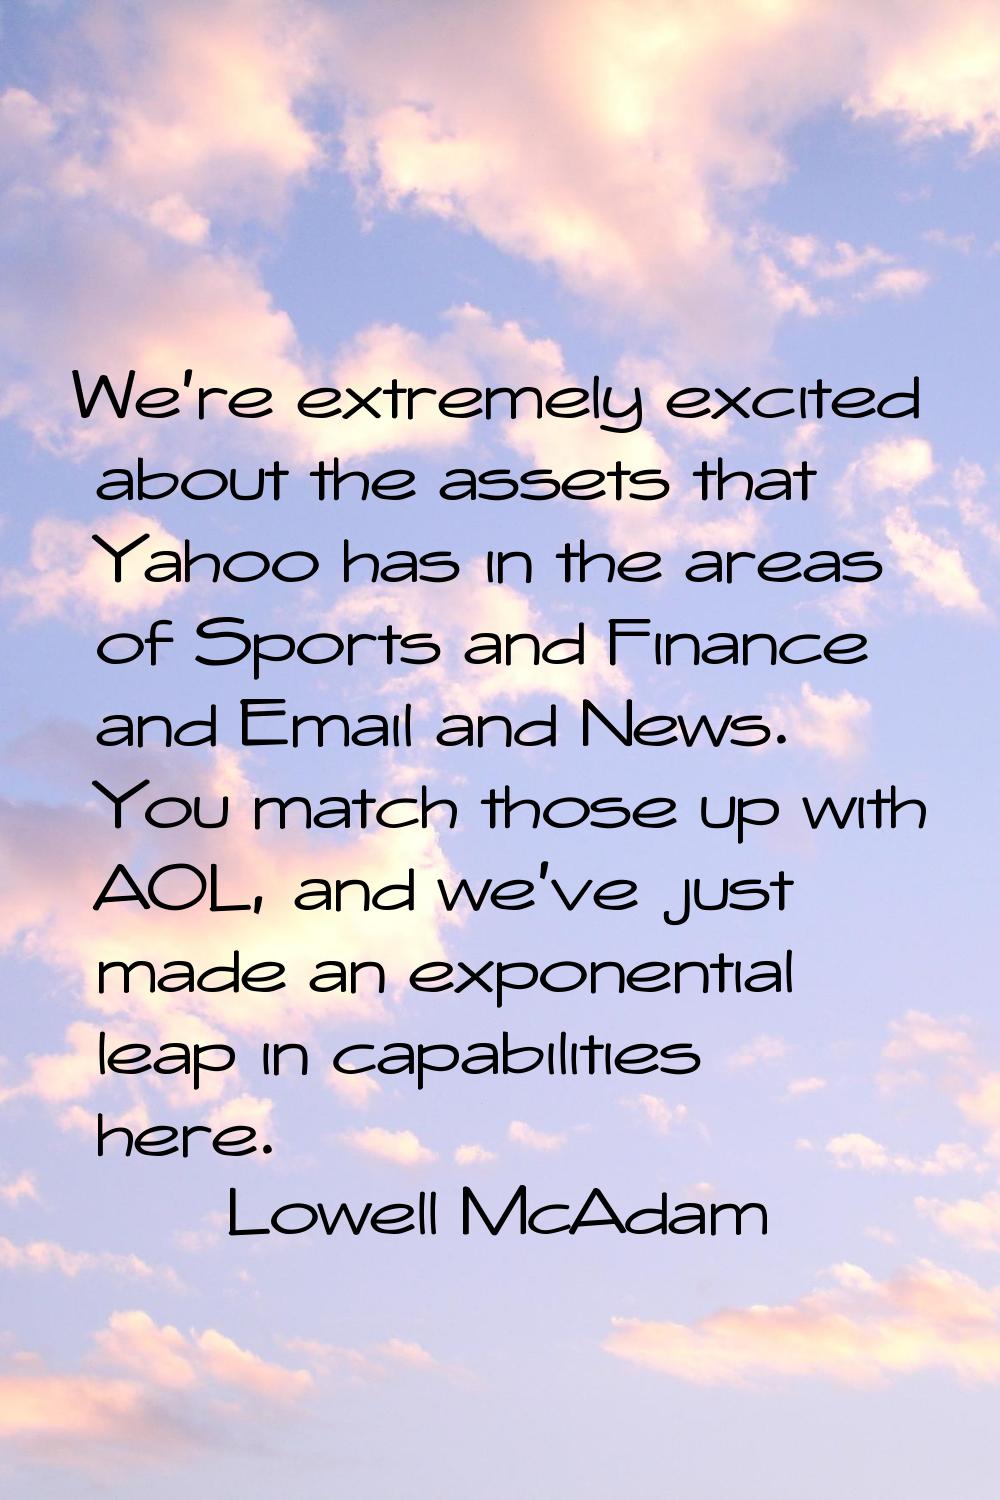 We're extremely excited about the assets that Yahoo has in the areas of Sports and Finance and Emai